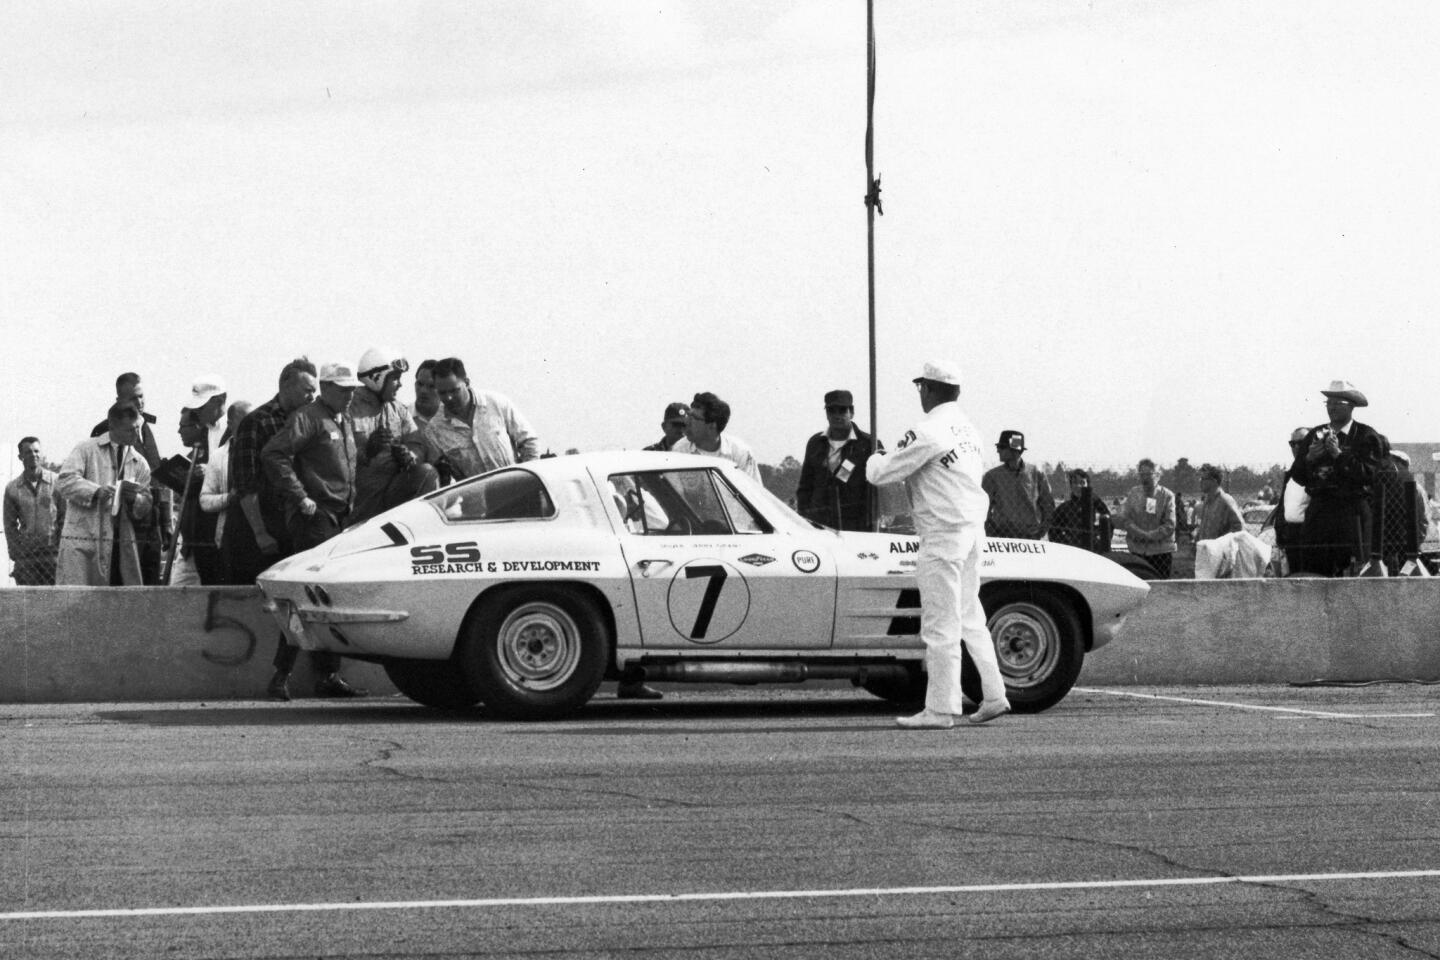 A Chevrolet Corvette Sting Ray is in the pits at Daytona International Speedway.